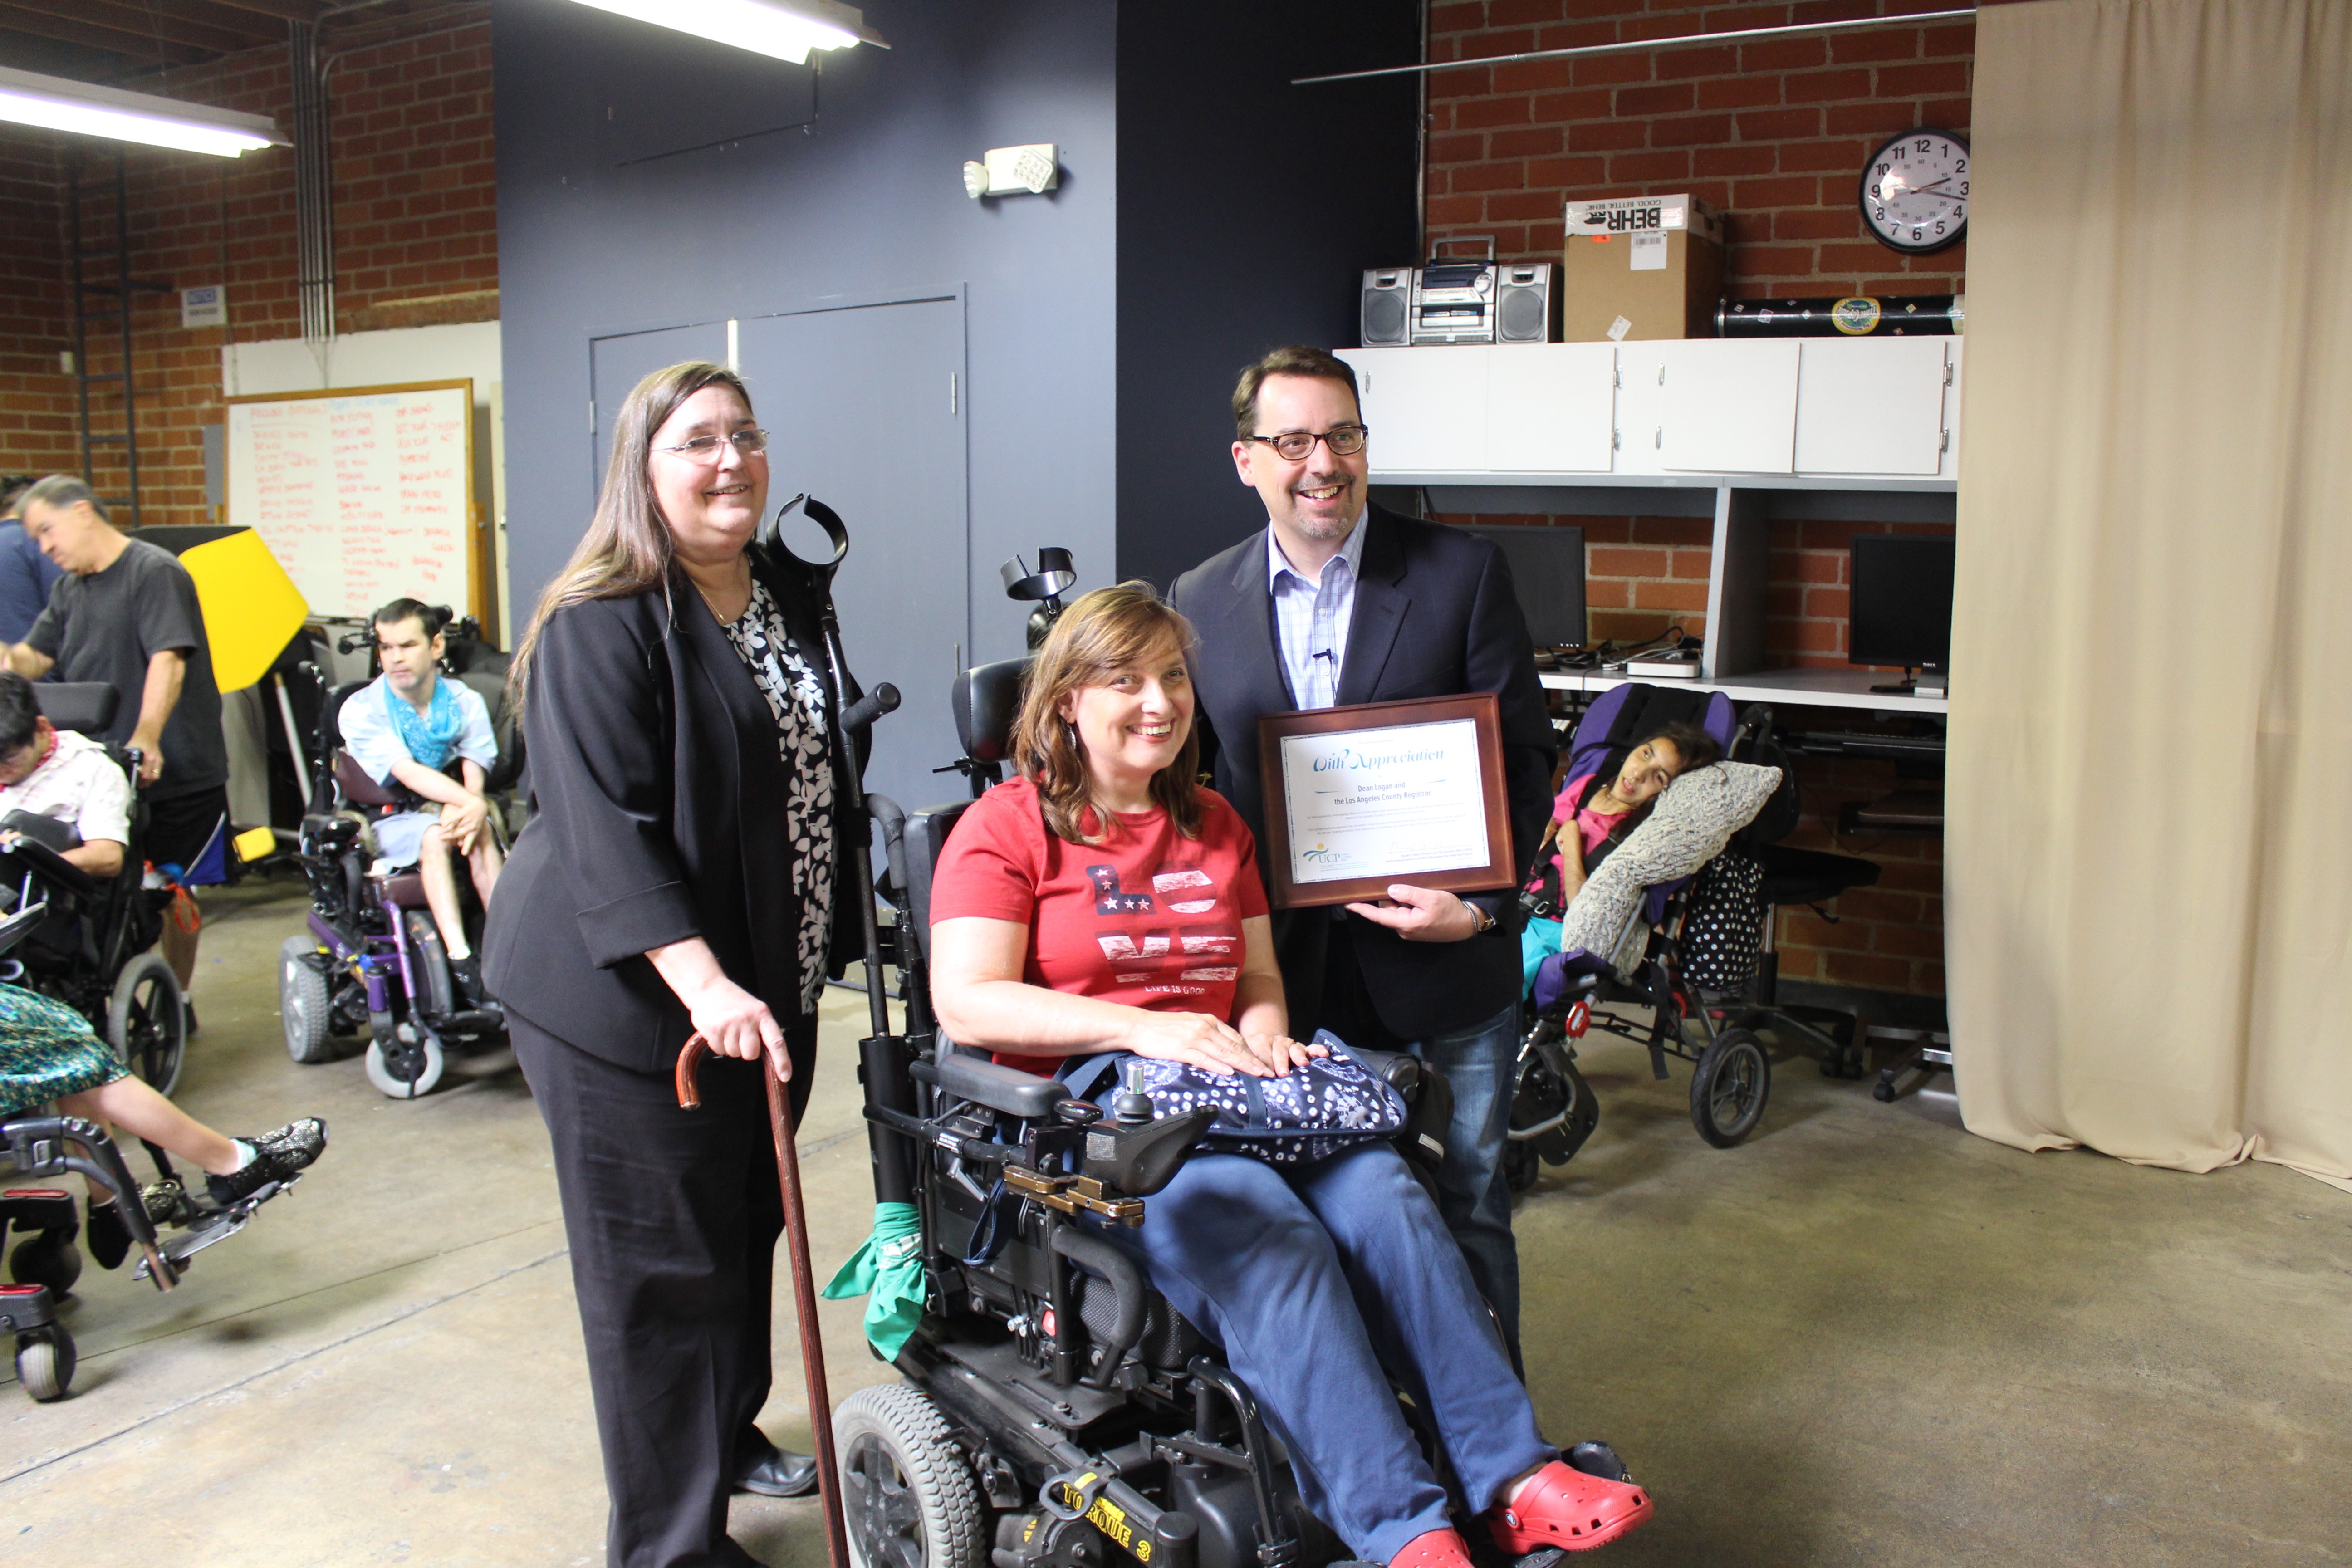 UCPLA Client Rights Advocate Terri Lantz (left) poses with LA County Registrar Recorder Dean Logan (right) and a self-advocate at UCPLA's Washington Place Adult Day Program.